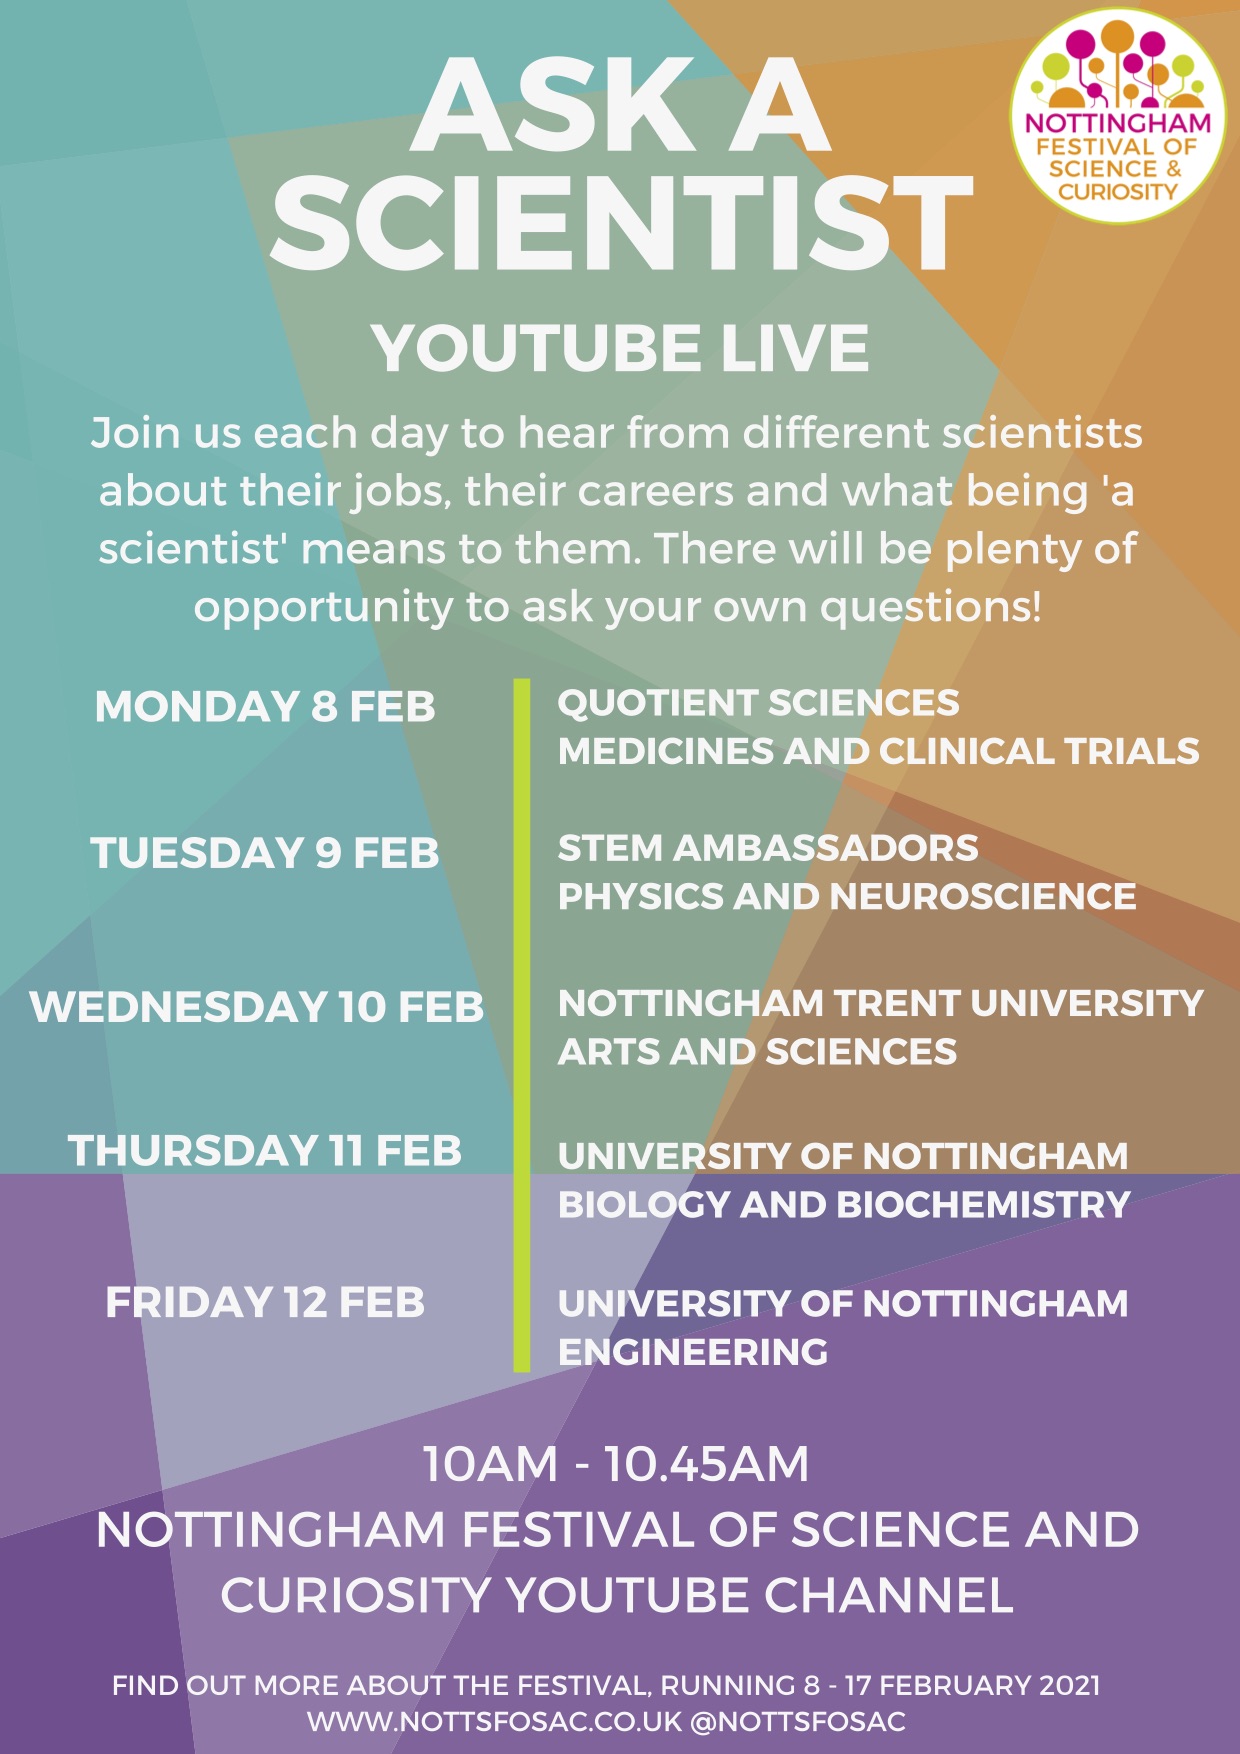 youtube-live-ask-a-scientist-flyer